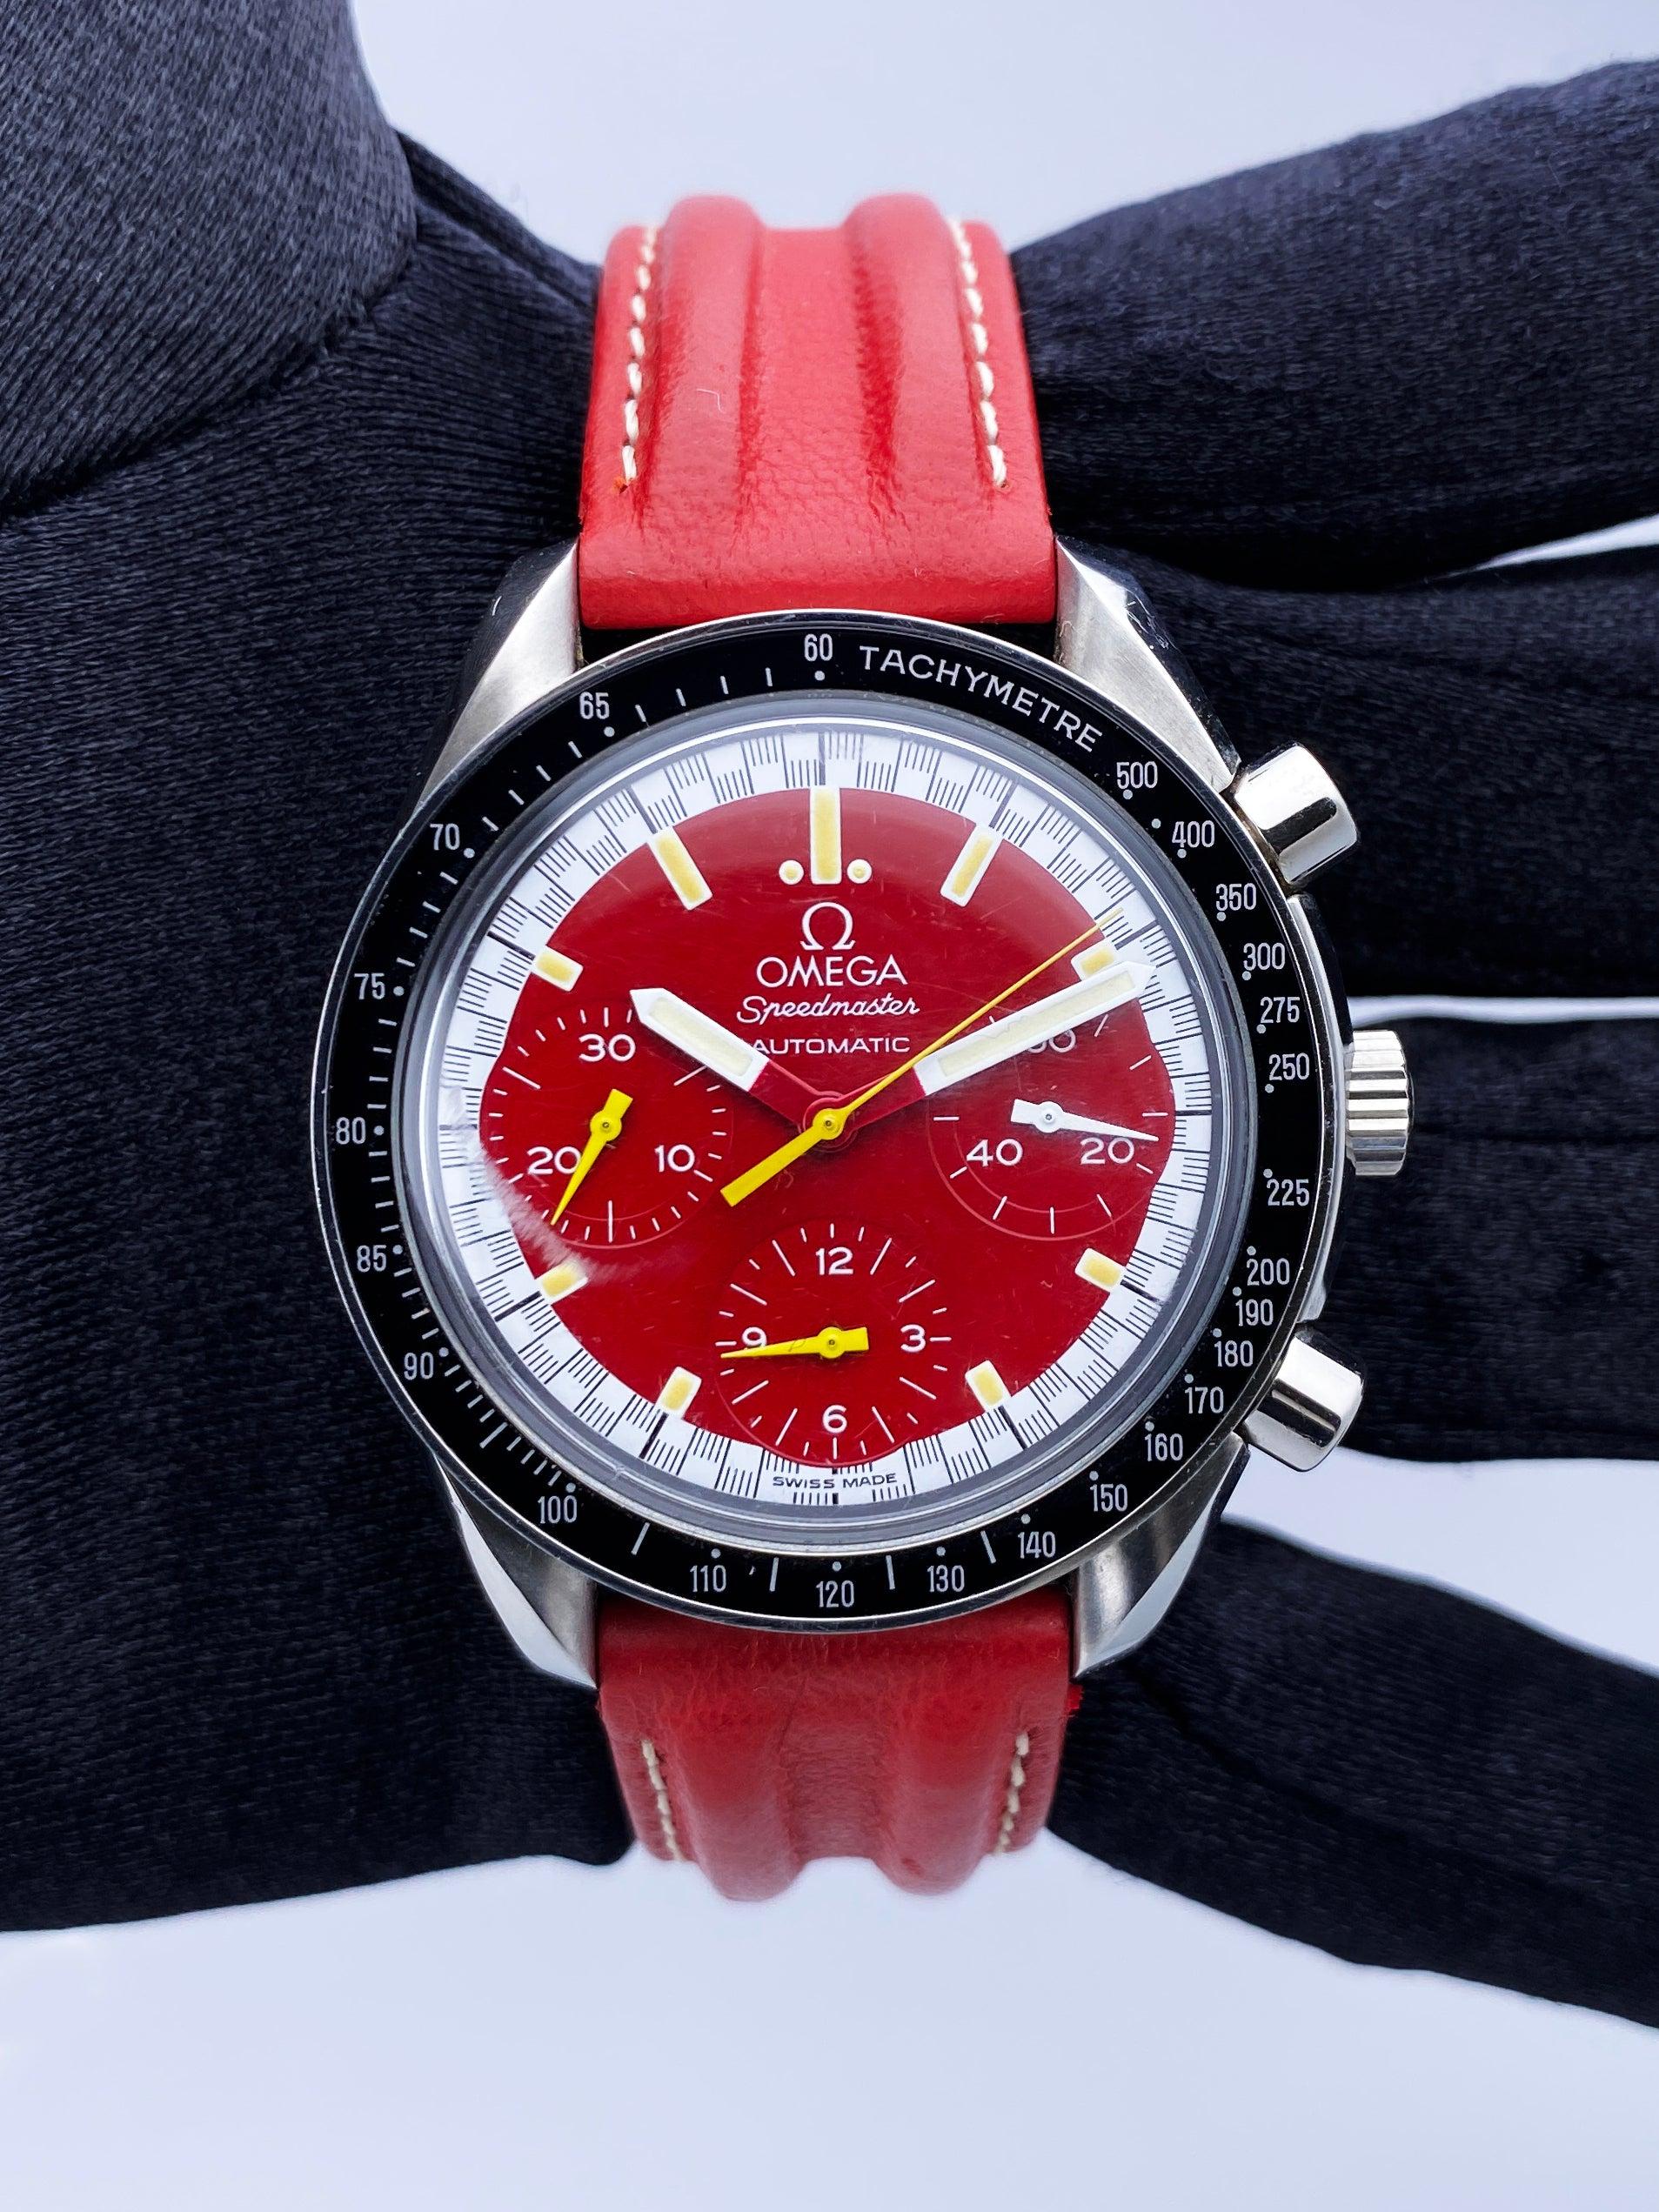 Omega Speedmaster Michael Schumacher 3810.61.41 Mens Watch. 39mm stainless steel case. Stainless steel tachymeter bezel with black insert. Red dial with luminous hands and index hour markers. Three sub-dials. Small seconds hand at 3 o'clock.